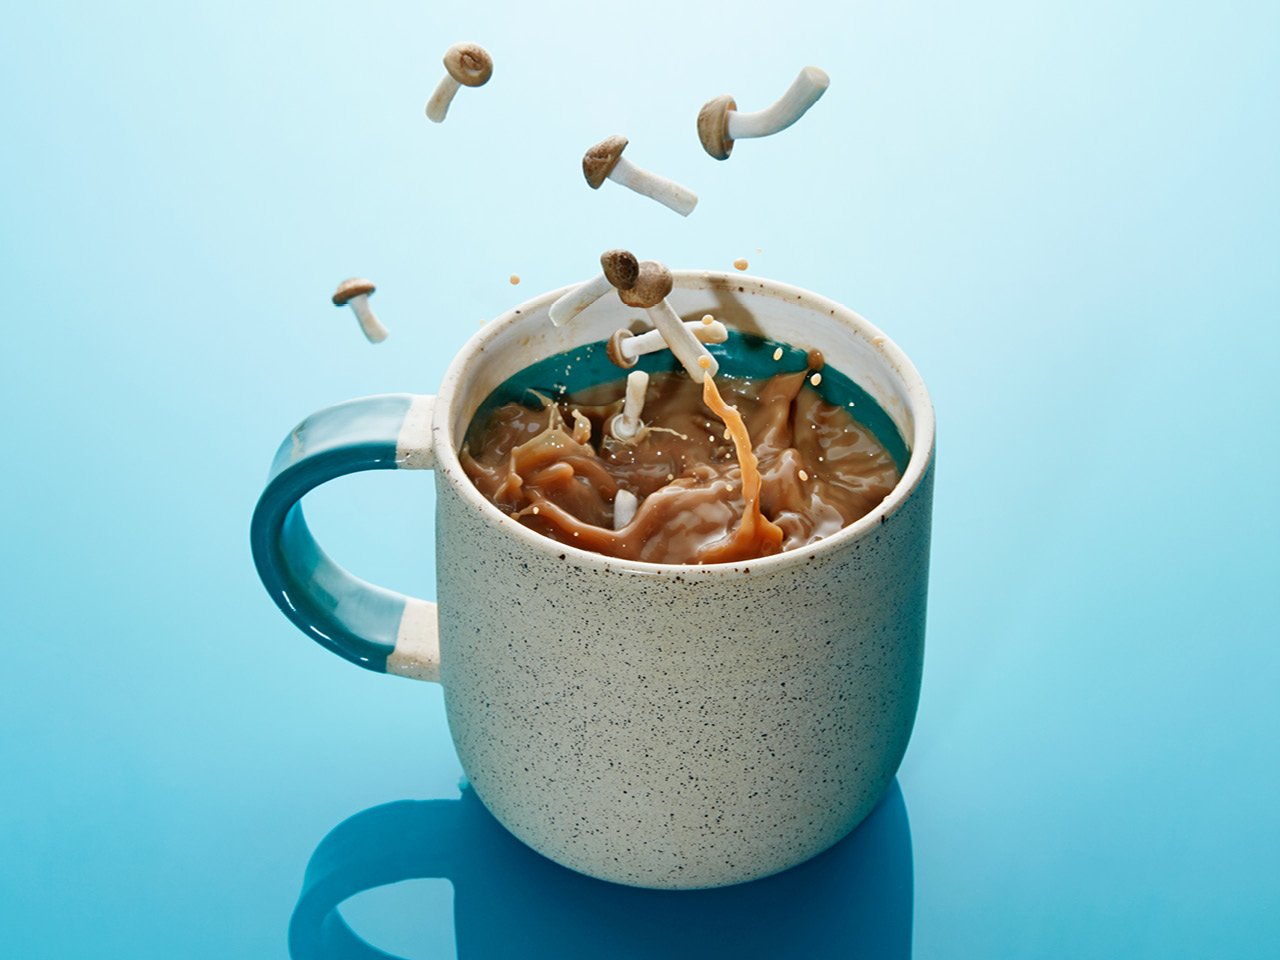 Mushrooms dropping into a mug of water against a blue background